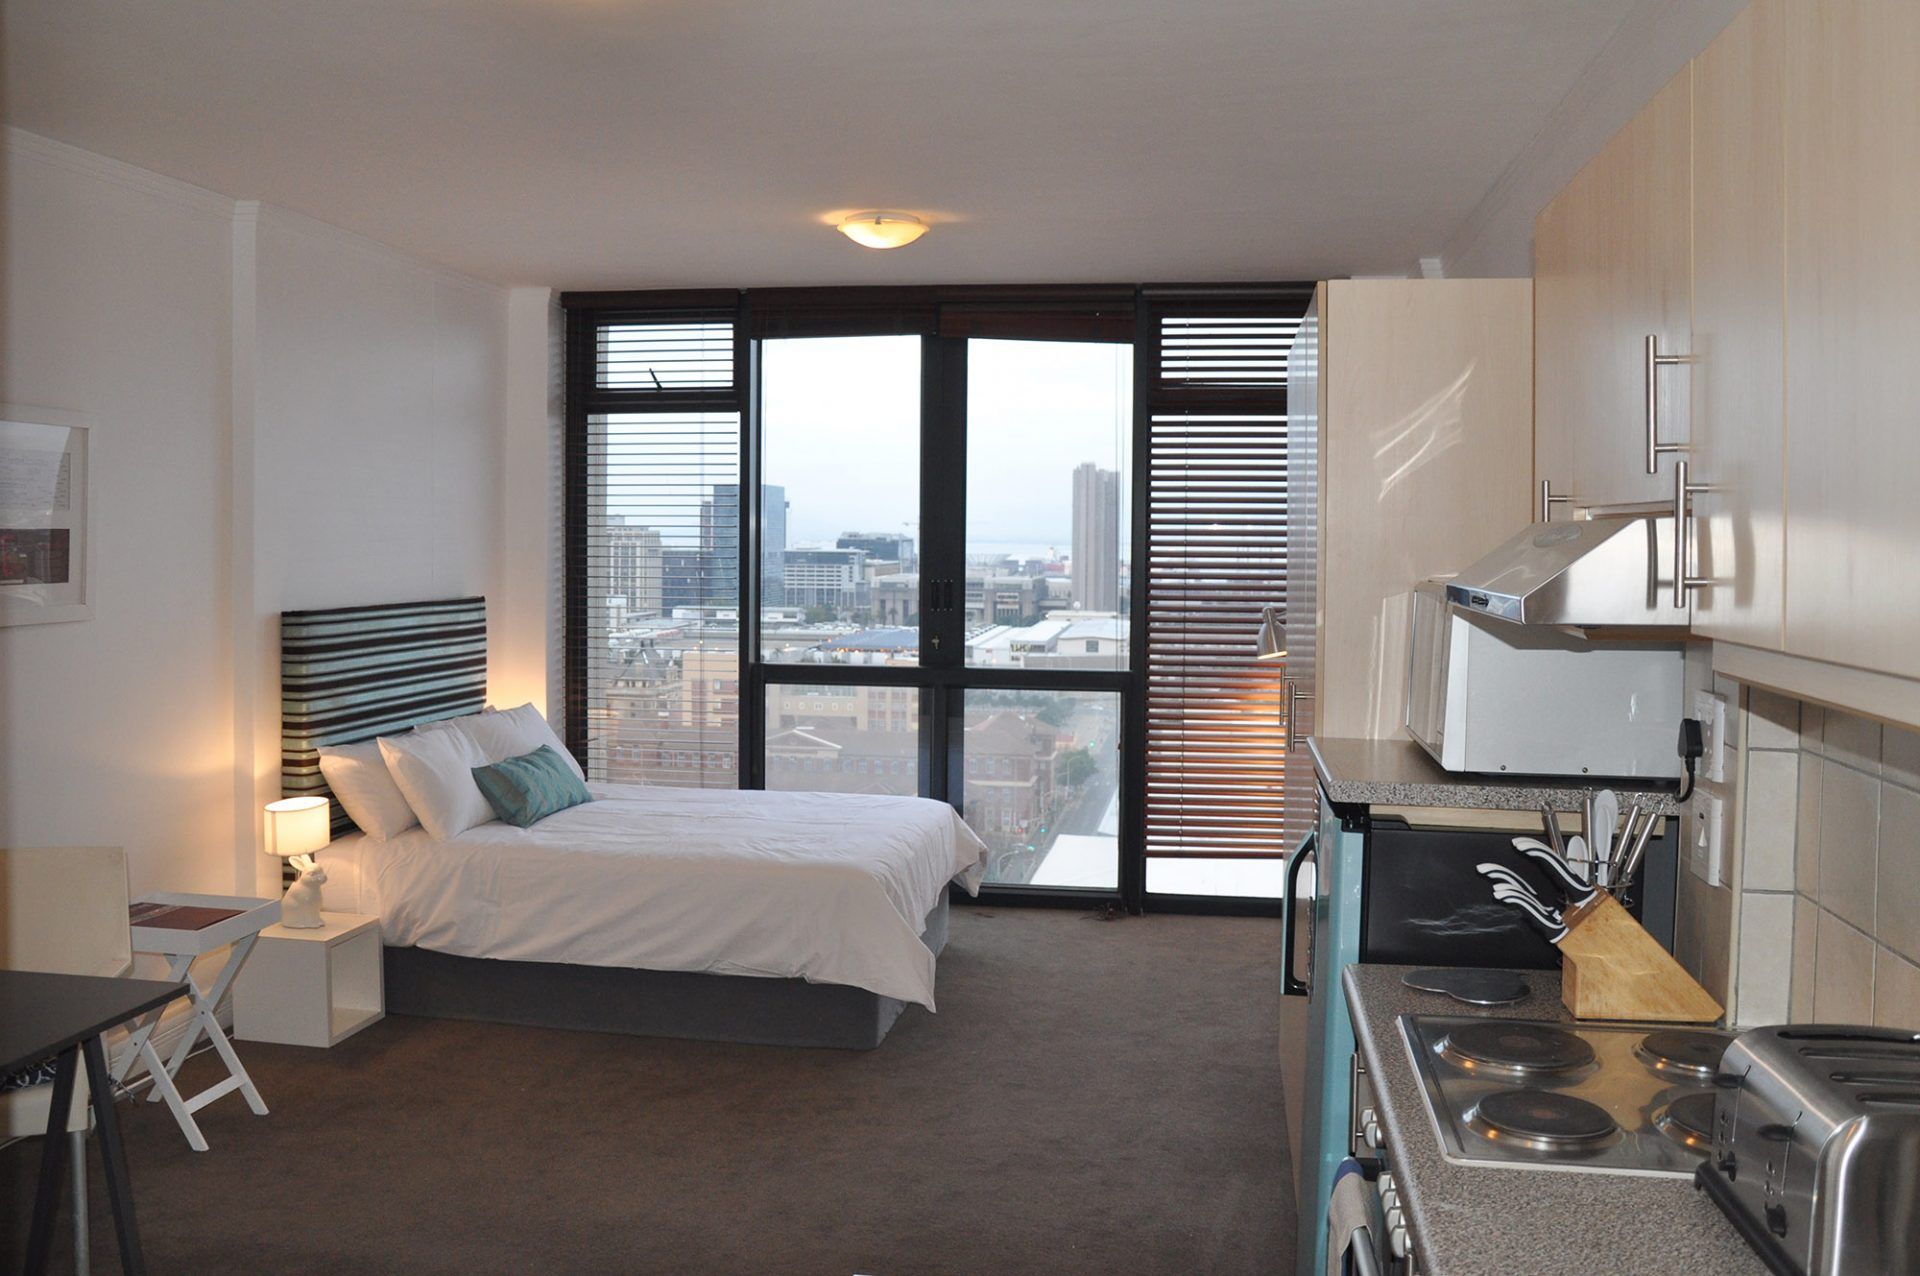 Photo 5 of Cityscapes Midtown Studio accommodation in City Centre, Cape Town with 1 bedrooms and 1 bathrooms